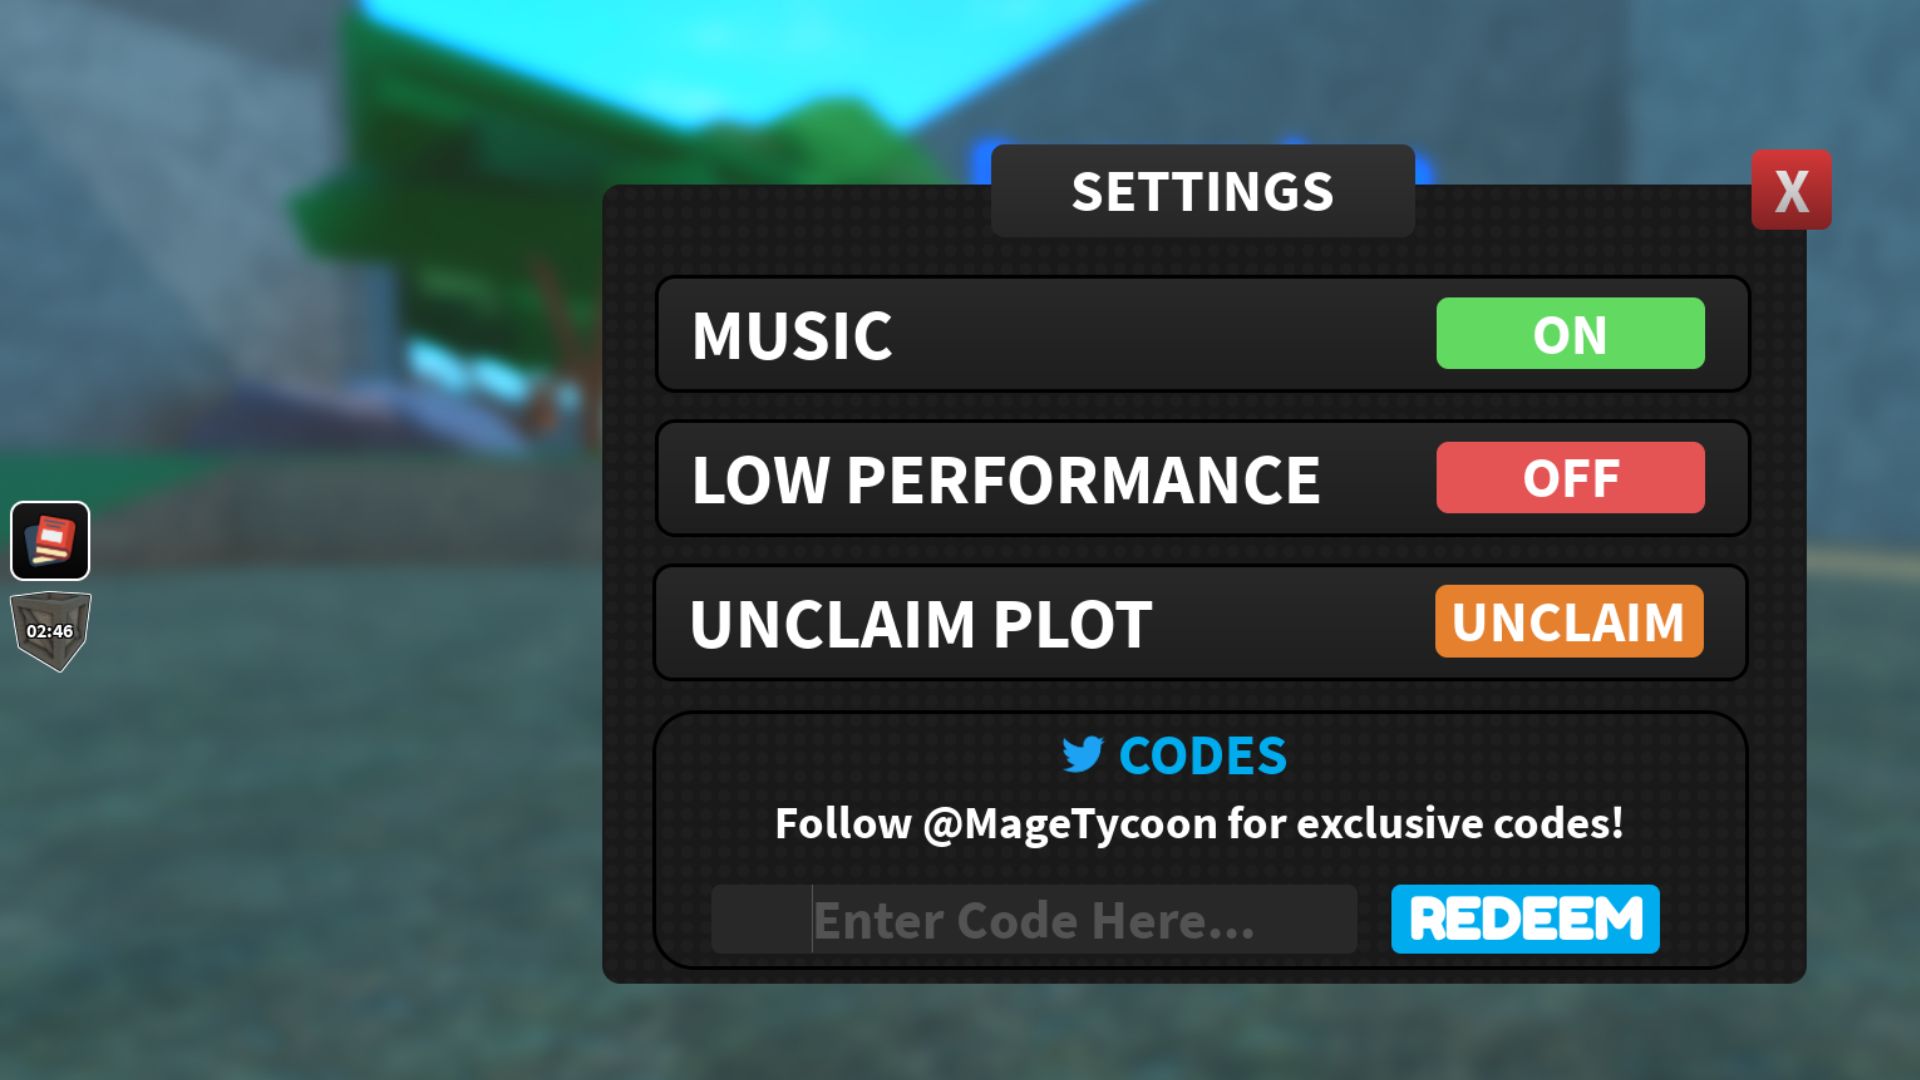 Magic Tycoon Remastered - Roblox